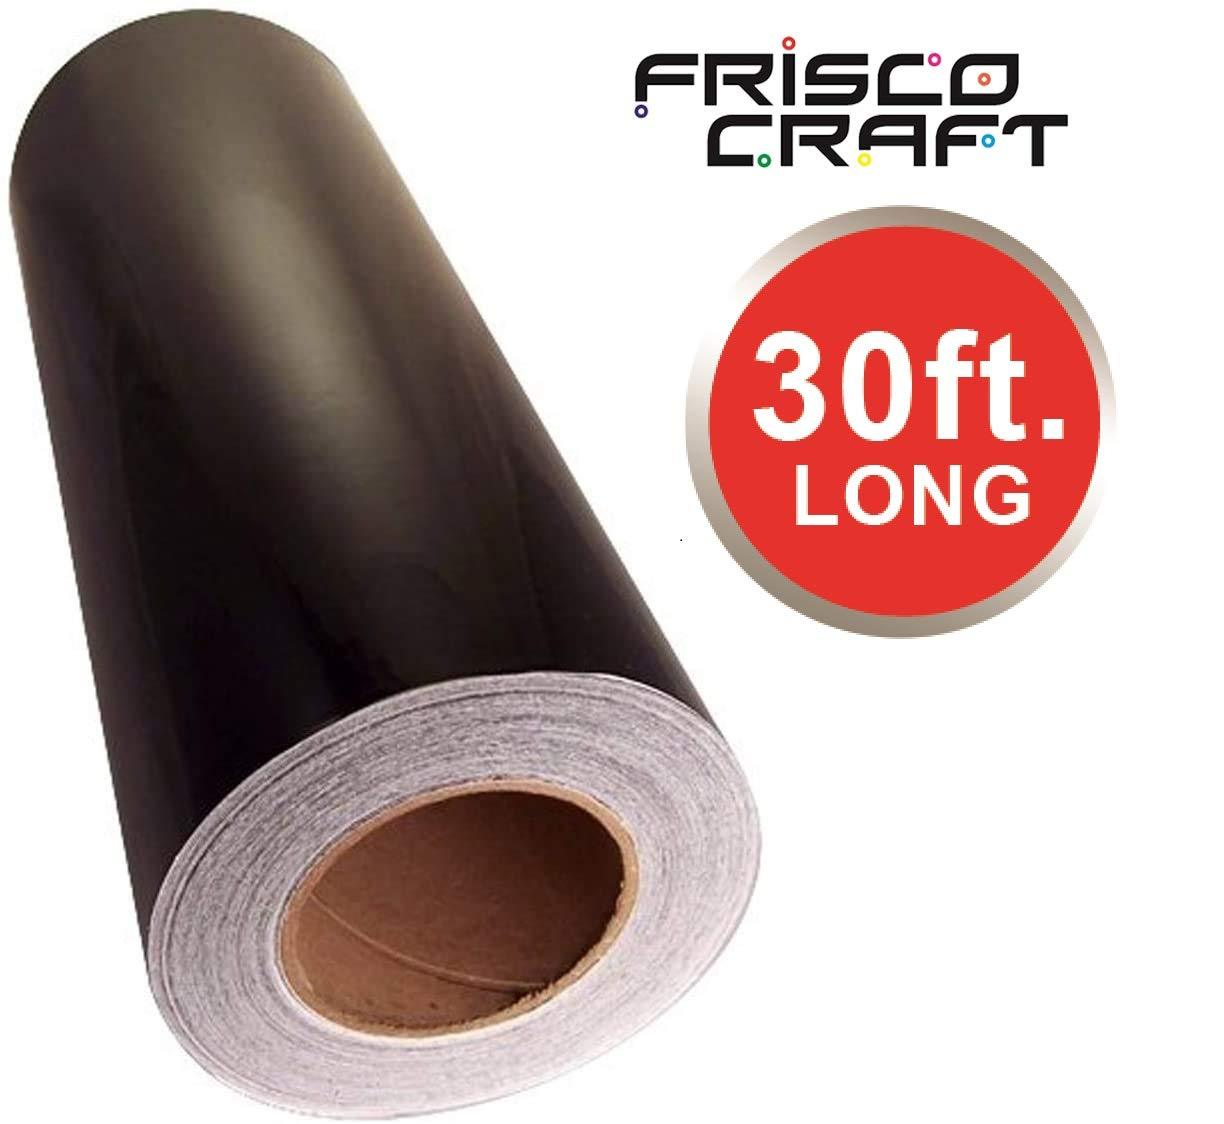 Frisco Craft Matte Black Permanent Adhesive Vinyl Roll 12 by 30